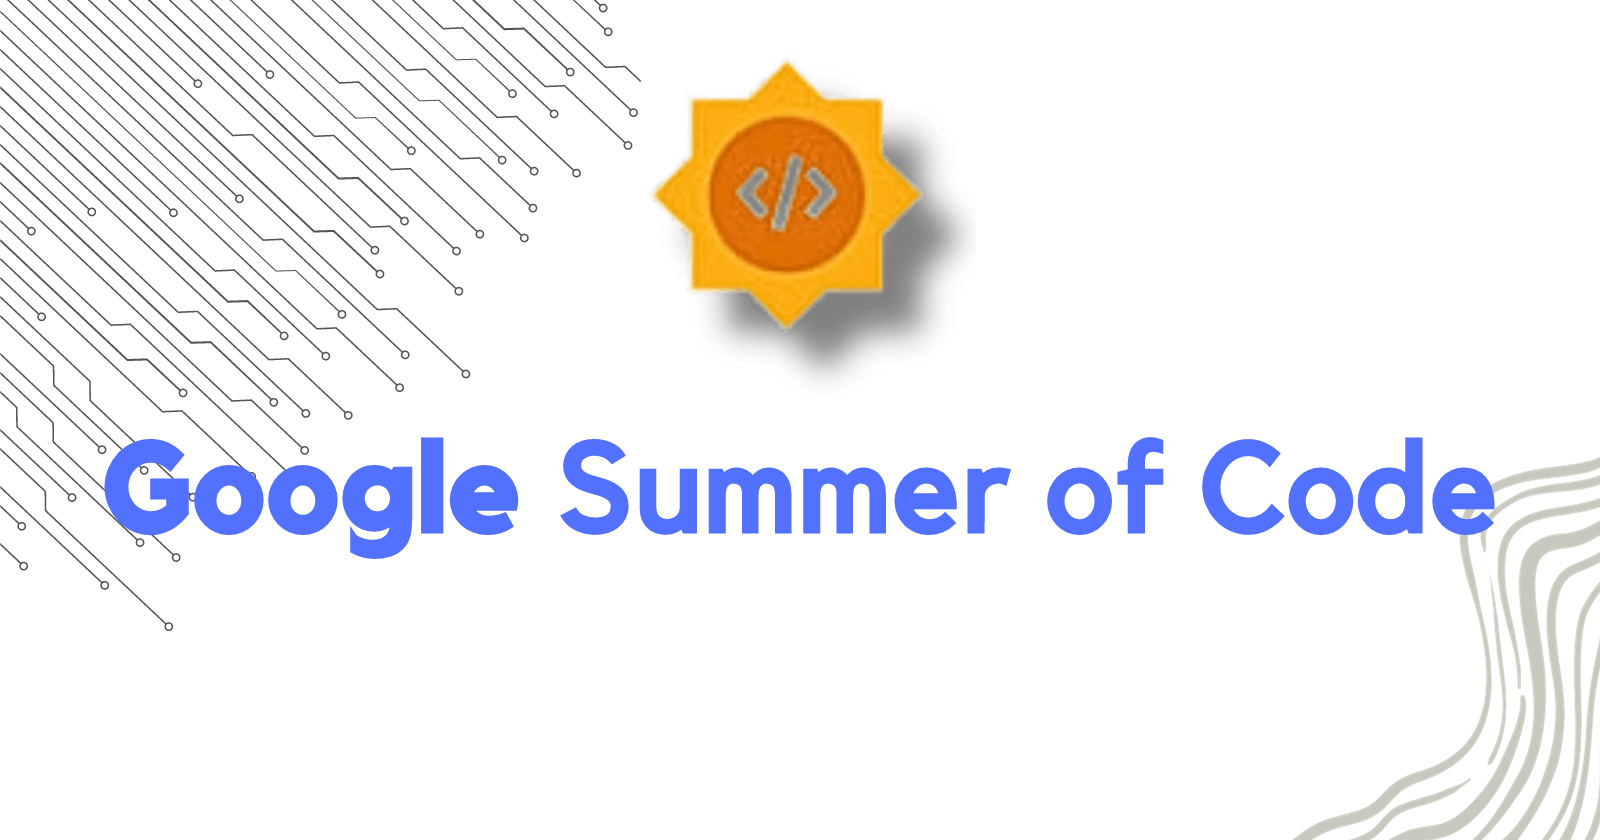 How I was selected for Google Summer of Code